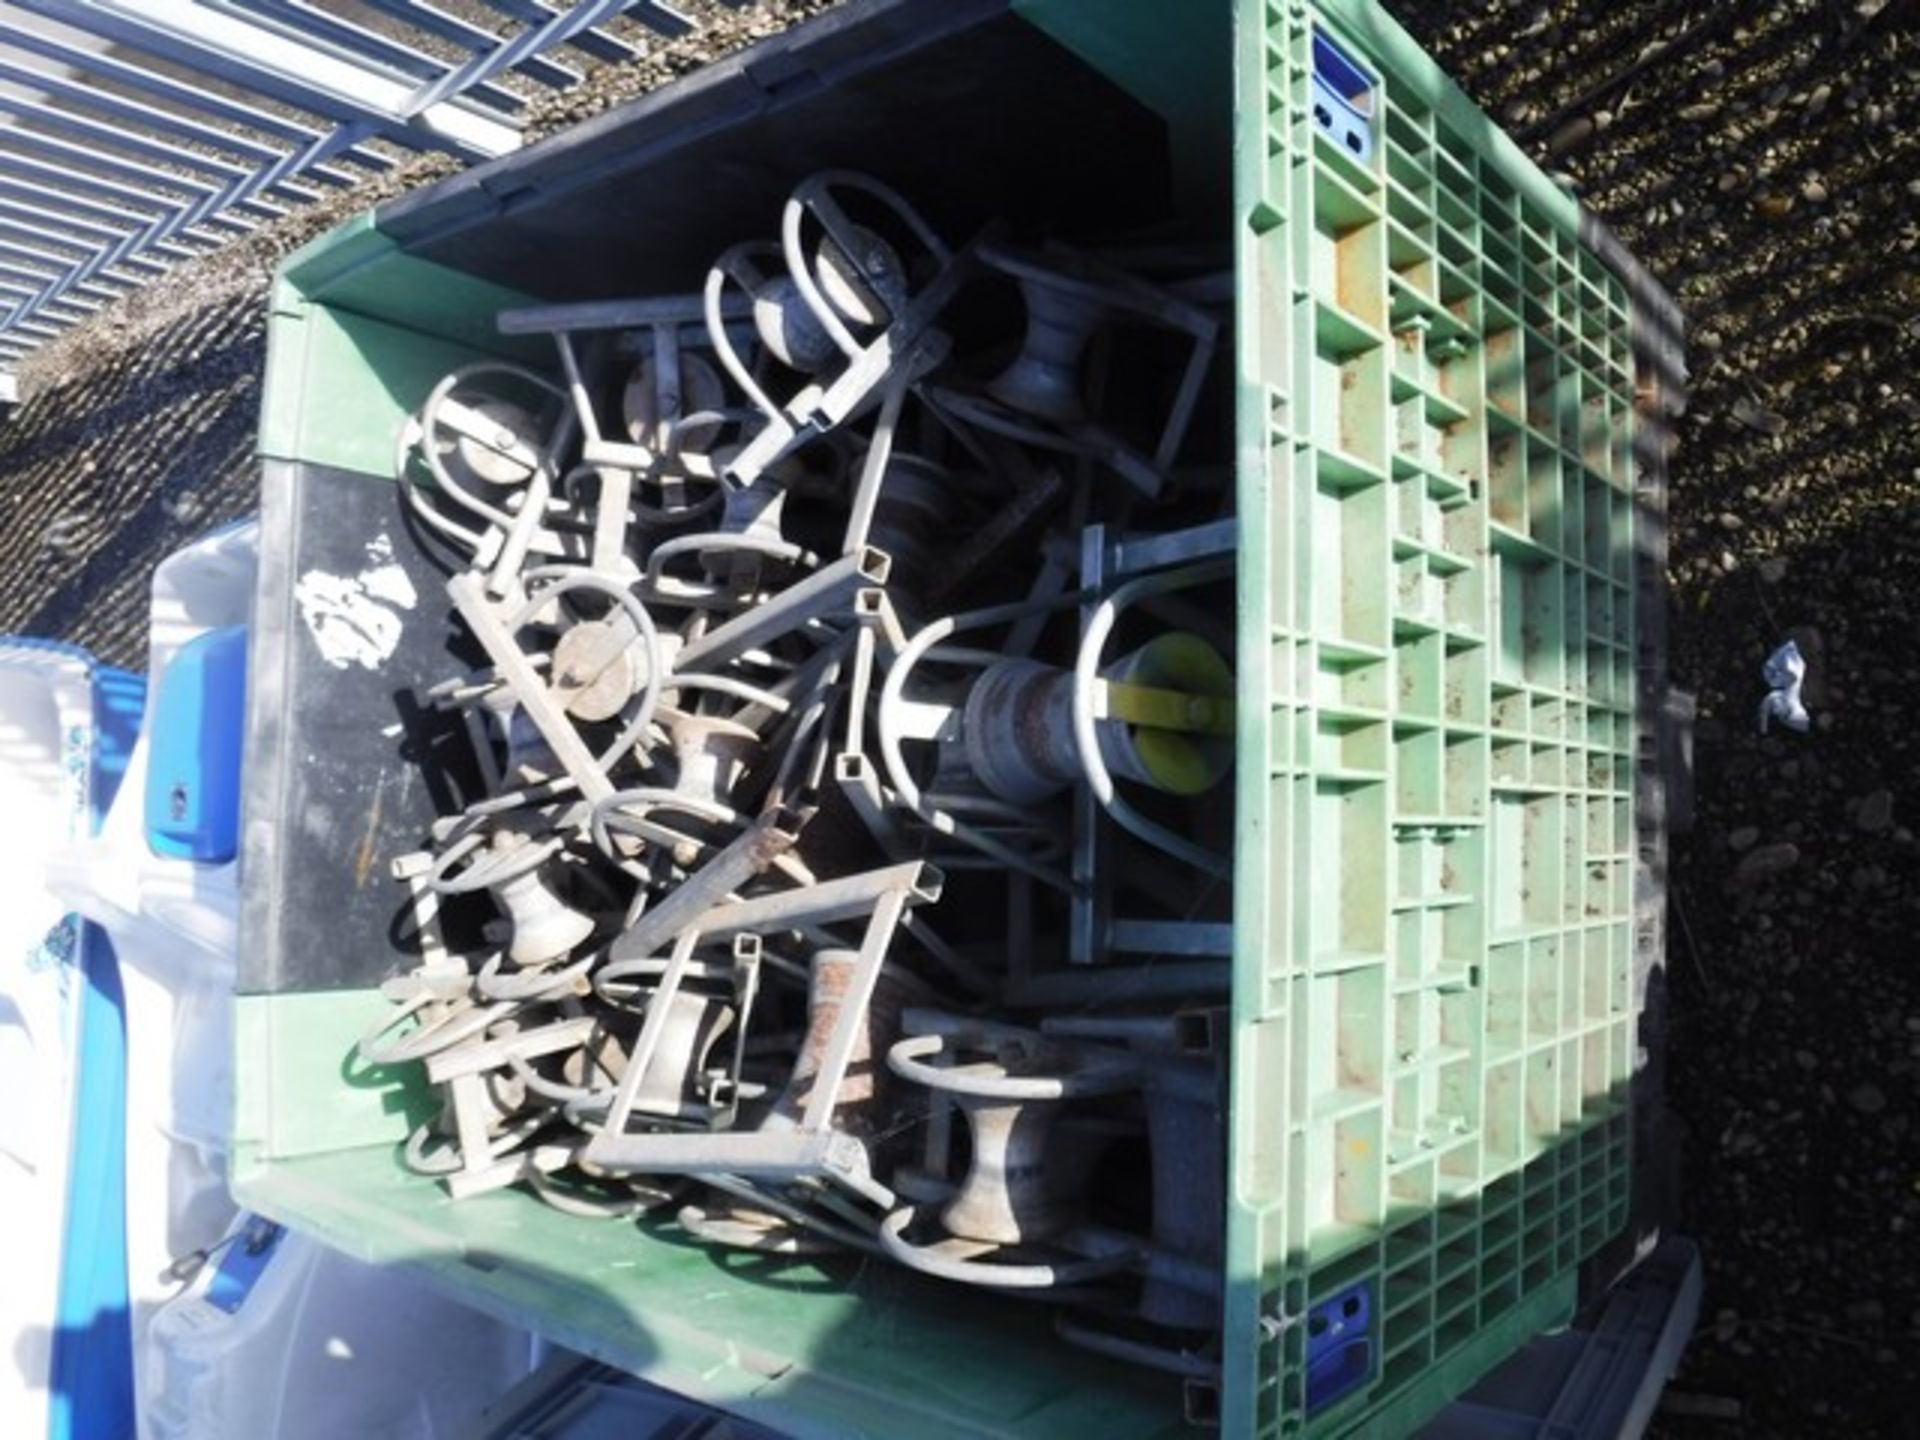 2 X CRATES OF CABLE ROLLERS & SELECTION OF STOCKINGS - Image 2 of 2